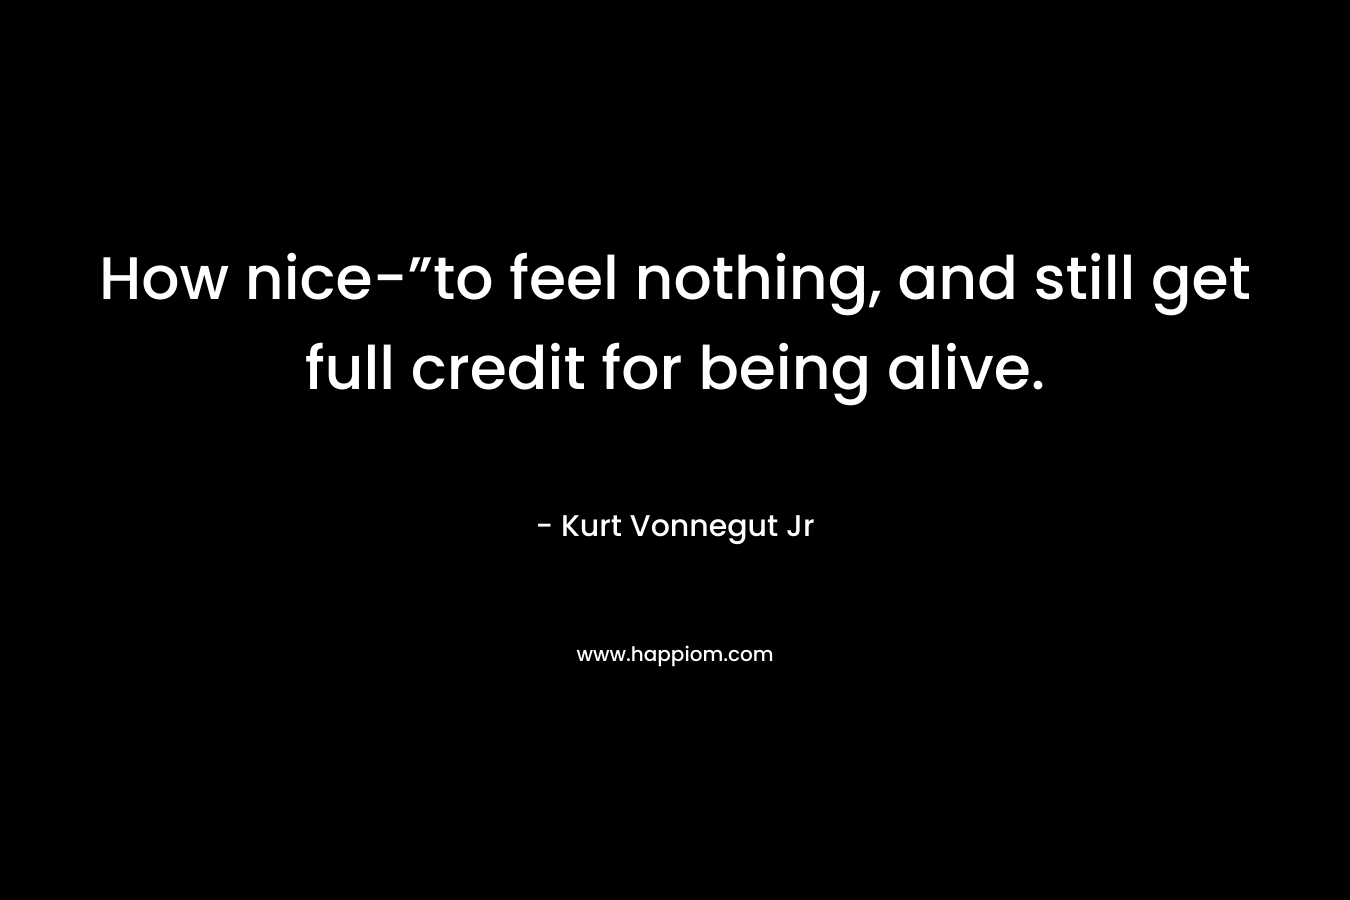 How nice-”to feel nothing, and still get full credit for being alive. – Kurt Vonnegut Jr